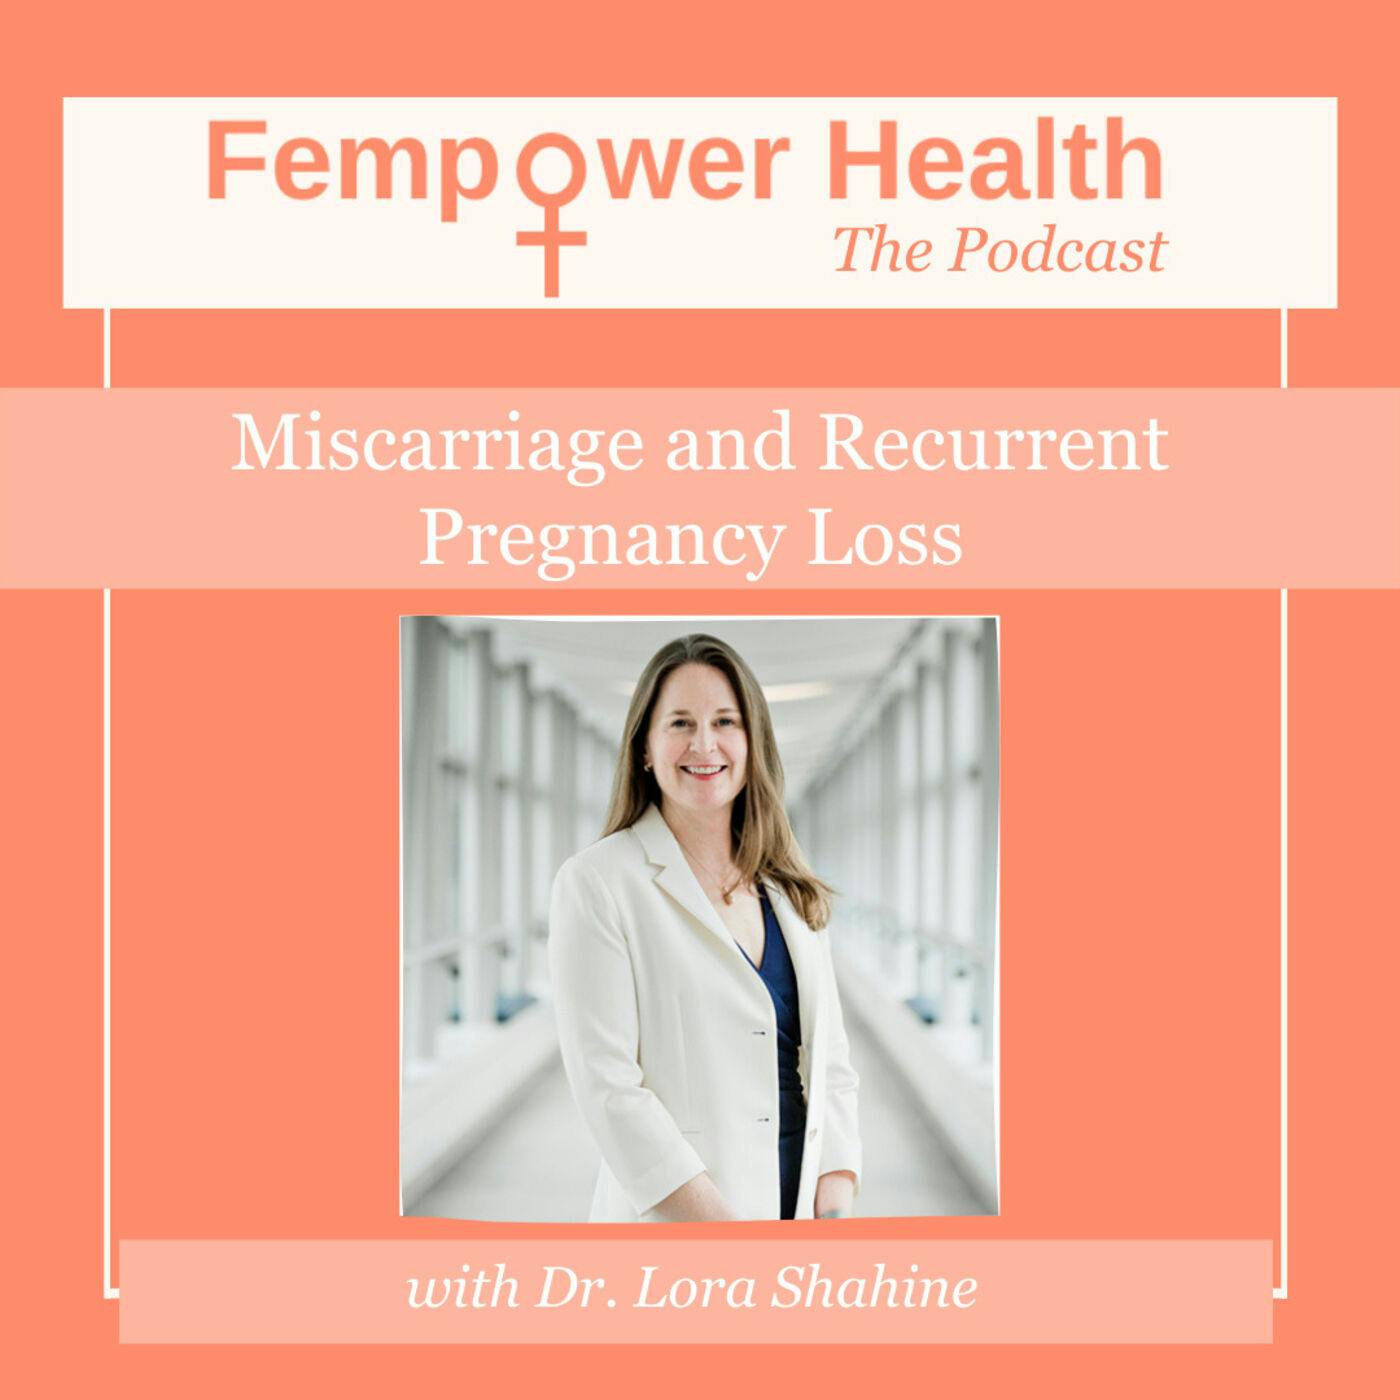 LISTEN AGAIN: Miscarriage and Recurrent Pregnancy Loss